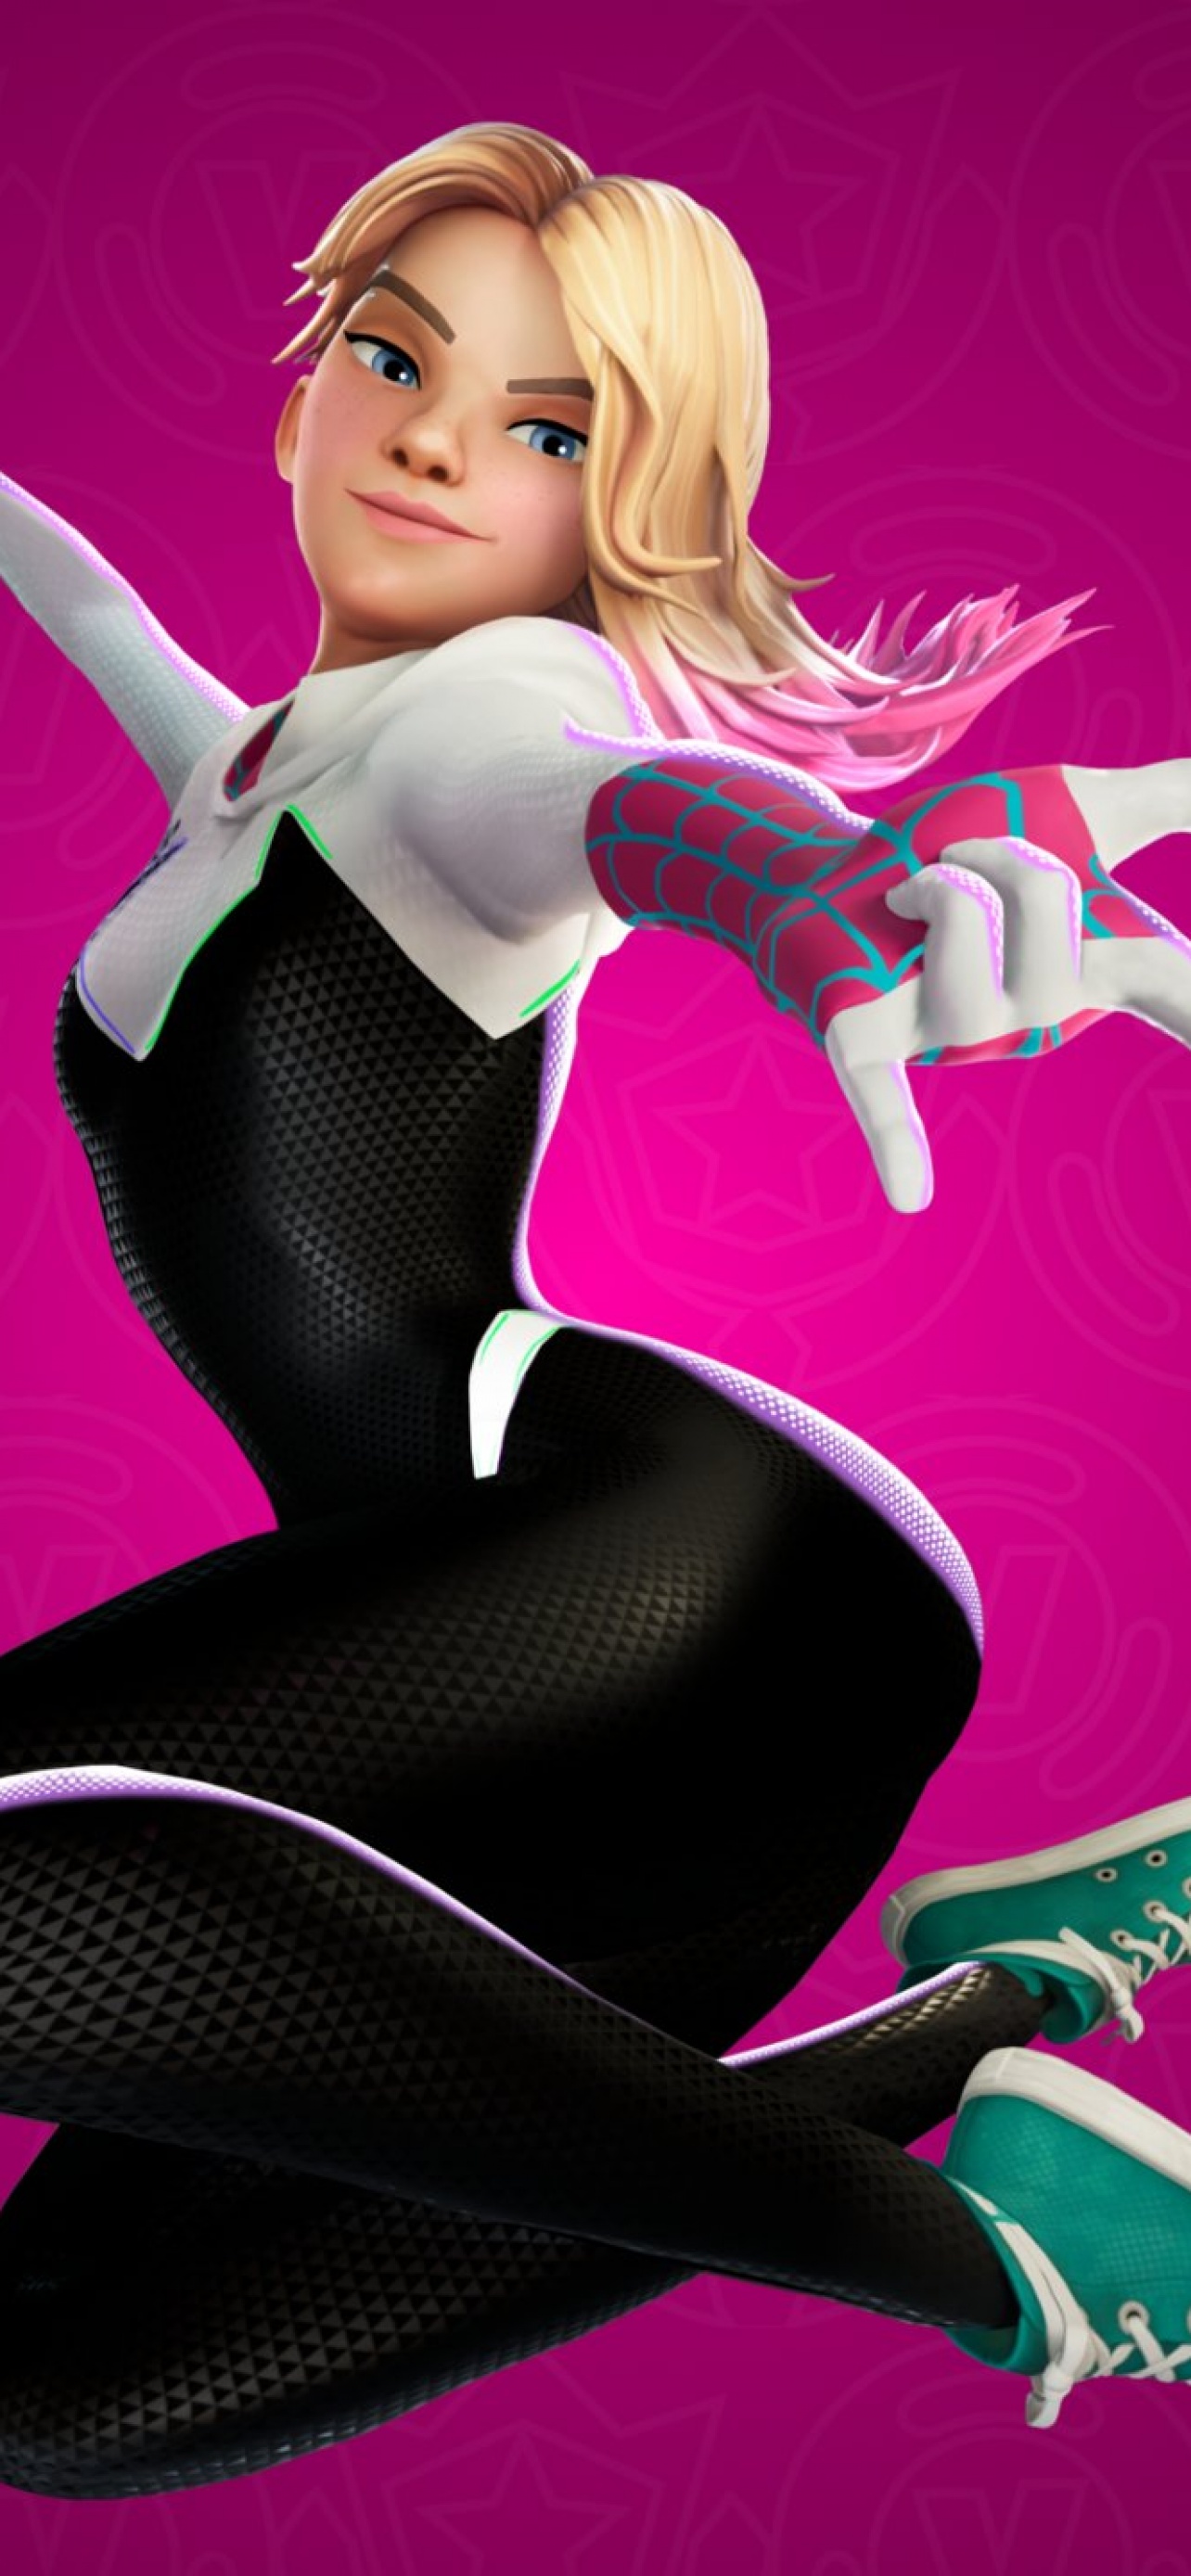 1080x1920 2020 Spider Gwen 4k Iphone 7,6s,6 Plus, Pixel xl ,One Plus 3,3t,5  HD 4k Wallpapers, Images, Backgrounds, Photos and Pictures